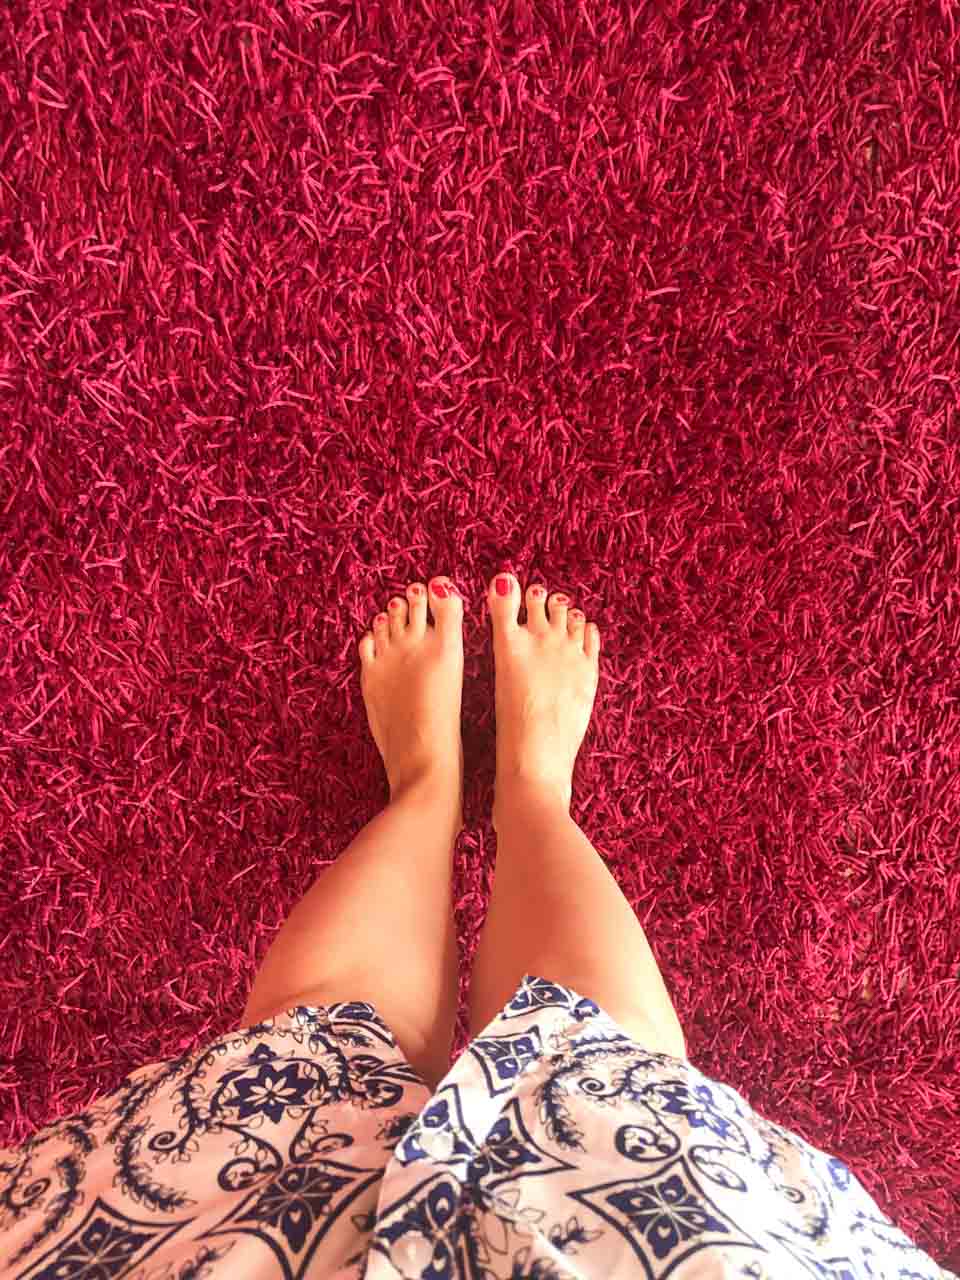 Woman standing barefoot on a pink fluffy carpet